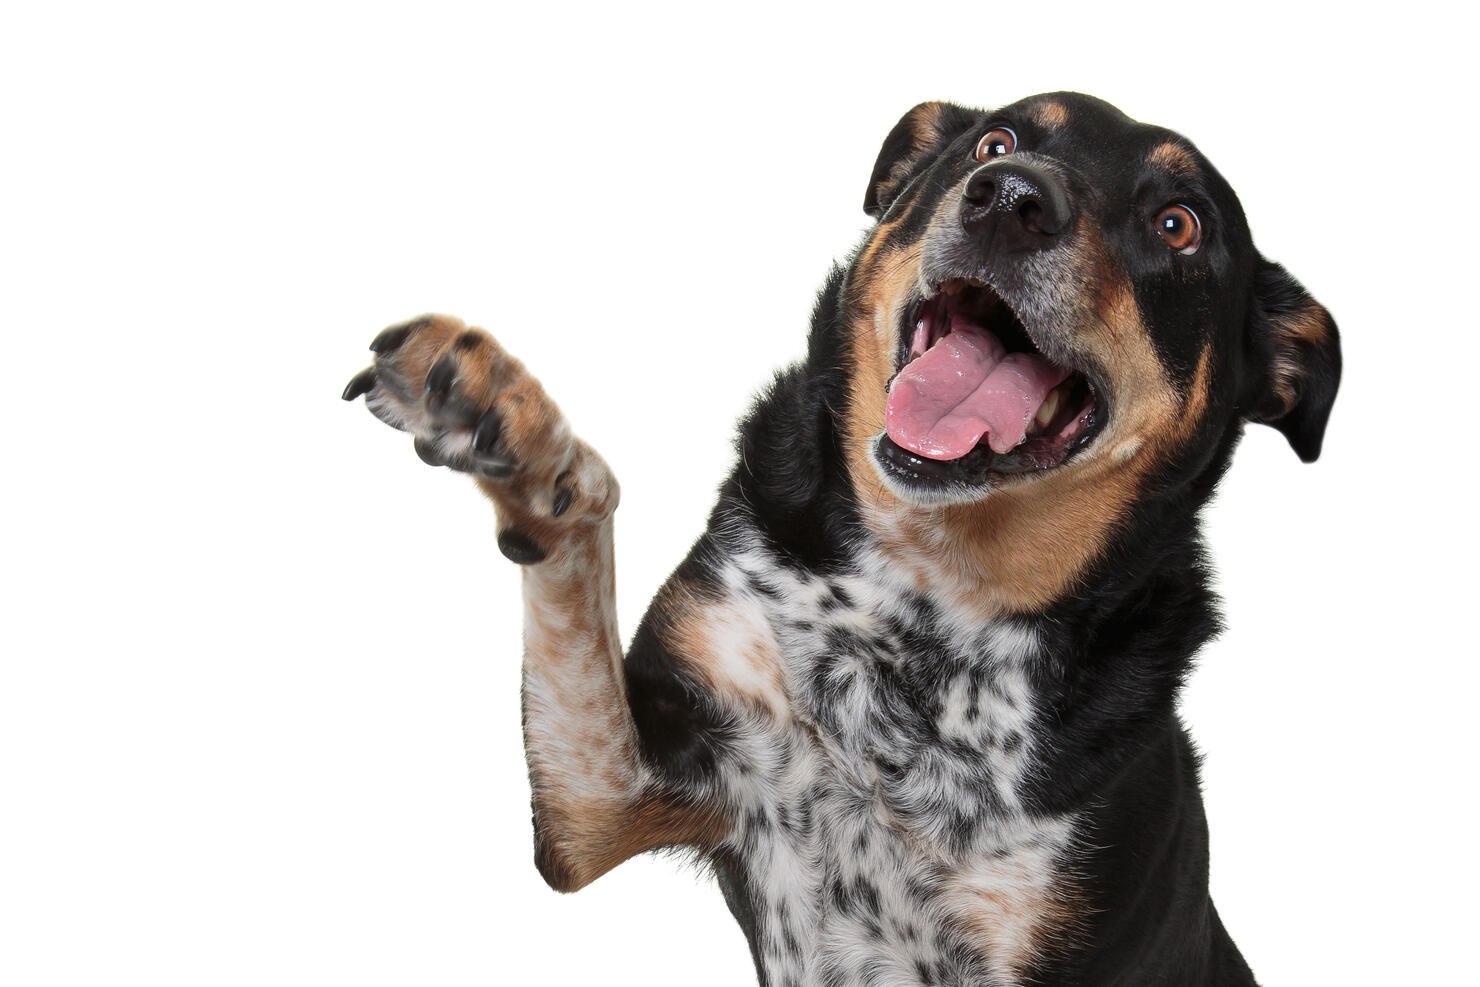 Headshot of a Rottweiler X Australian Cattle Dog giving a high five with it's mouth open on a white background.